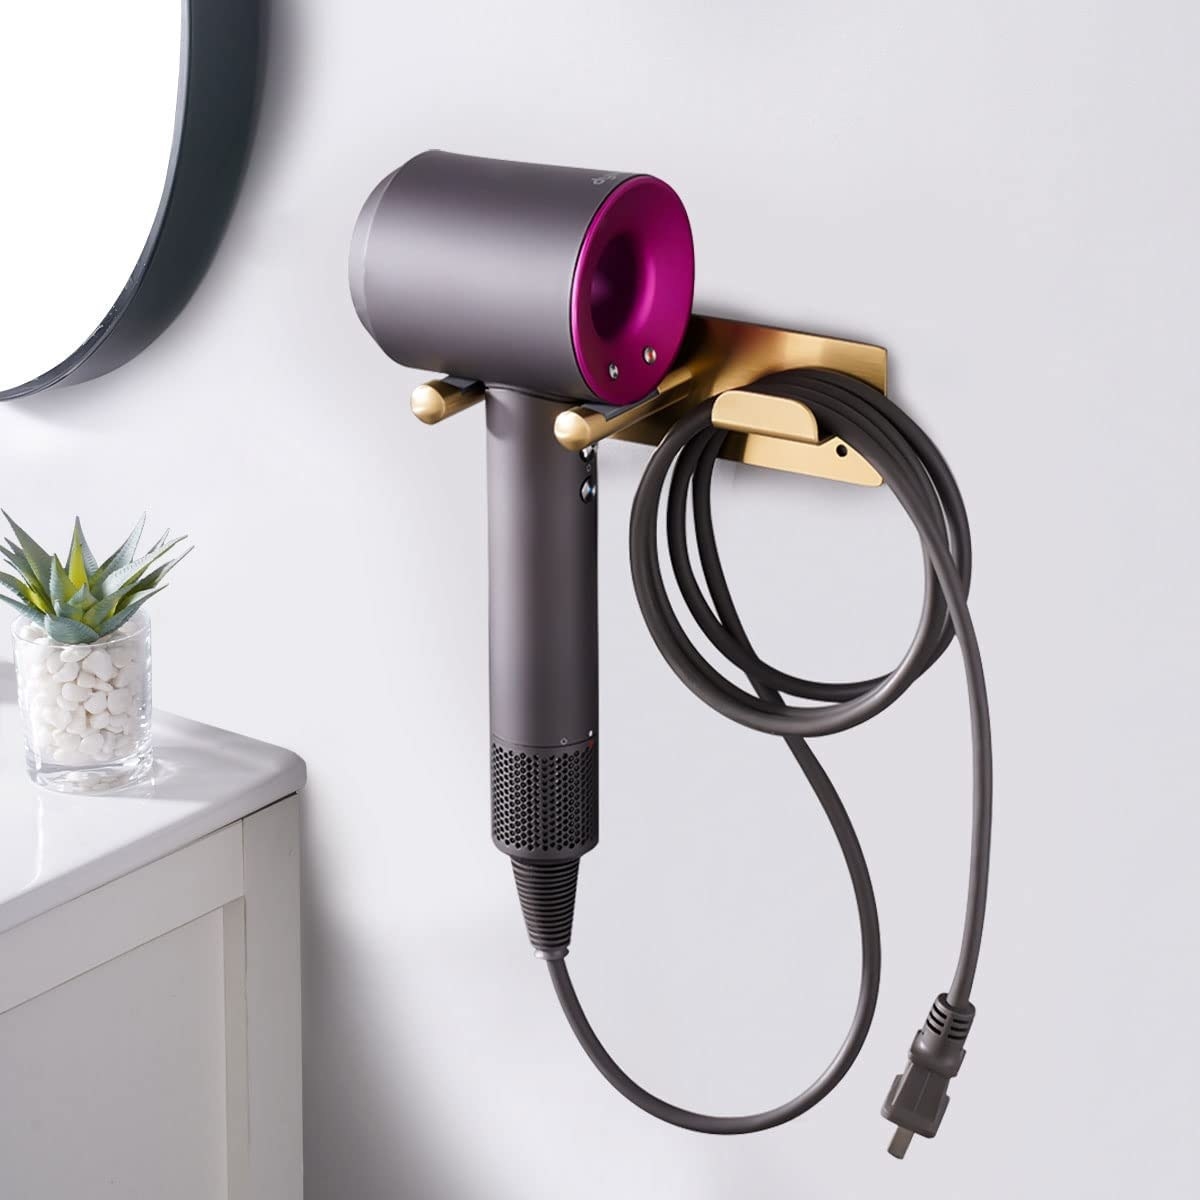 Dyson hair dryer with attachments mounted on a wall, a small plant and mirror in the background